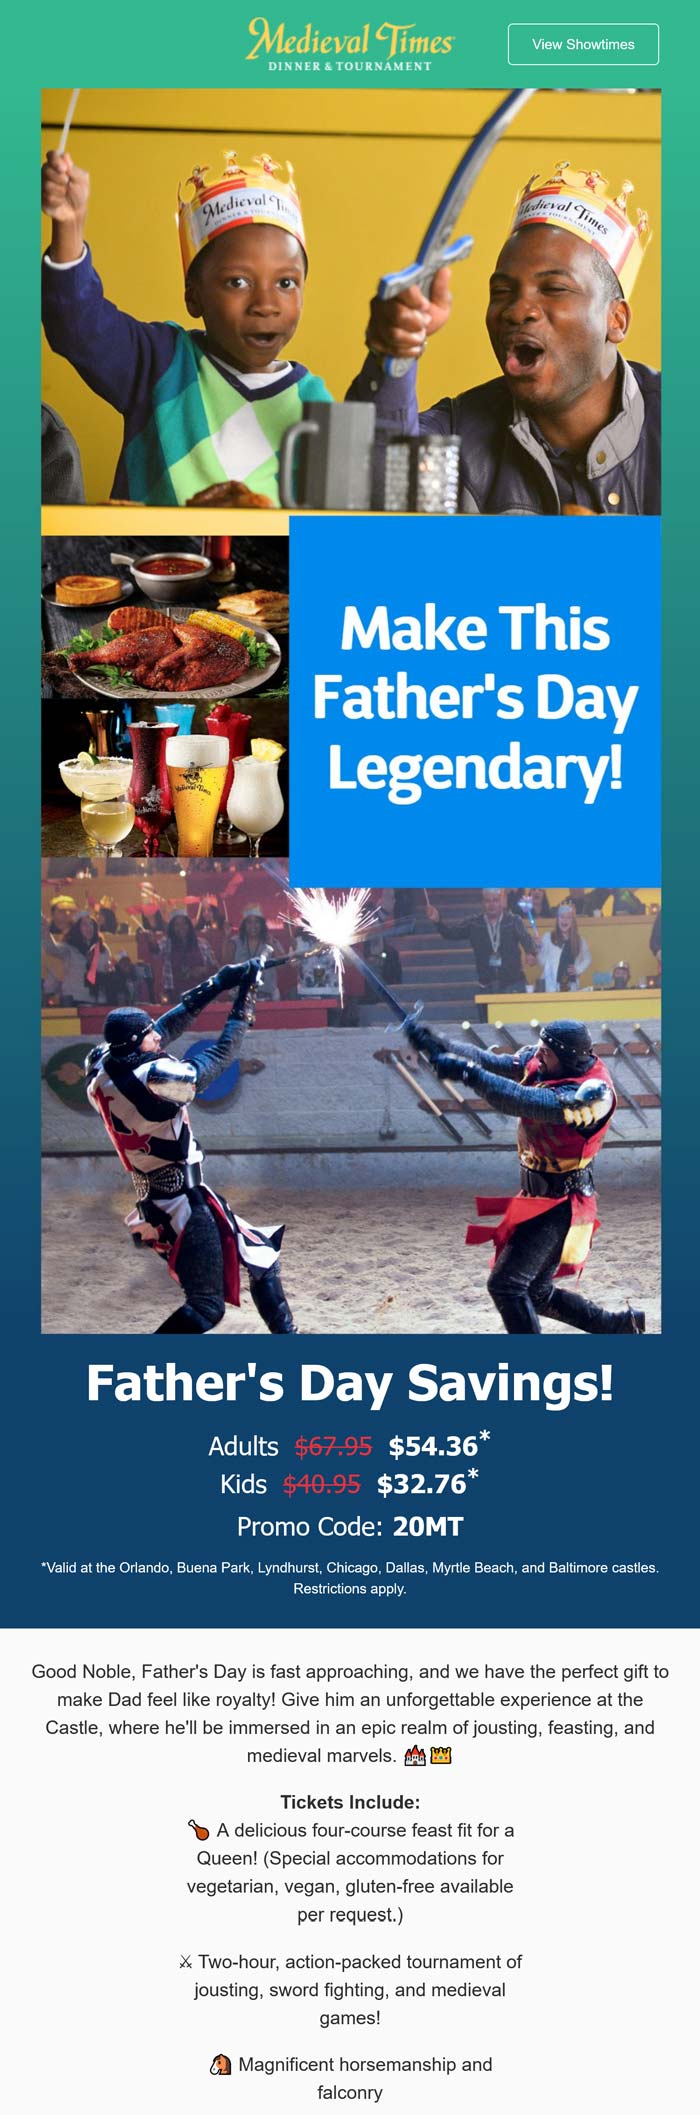 Medieval Times restaurants Coupon  20% off 4-course feast & tournament for fathers day at Medieval Times restaurant and show via promo code 20MT #medievaltimes 